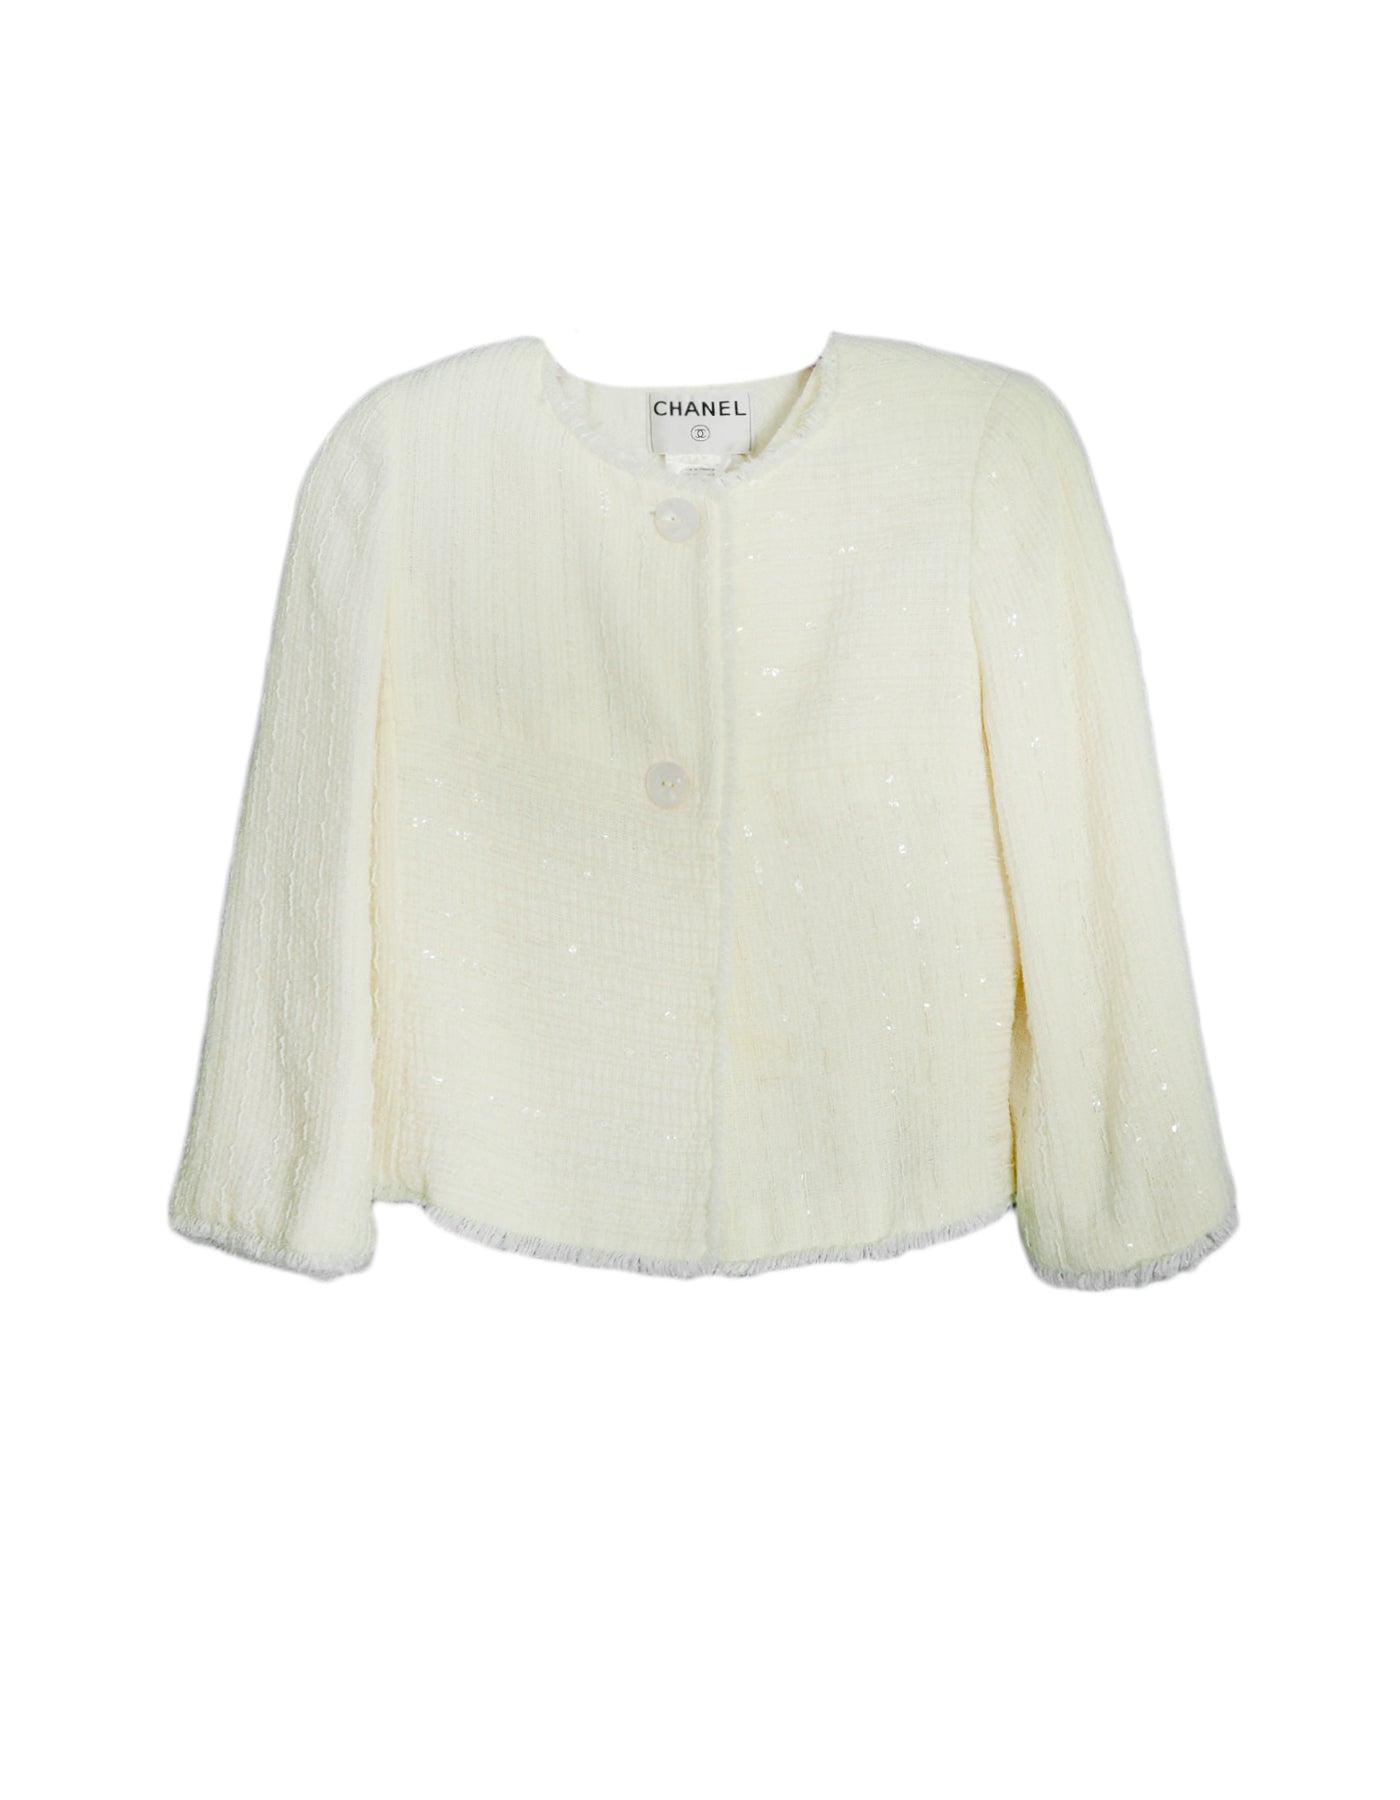 Chanel Cream Boucle Jacket and Shell sz 40